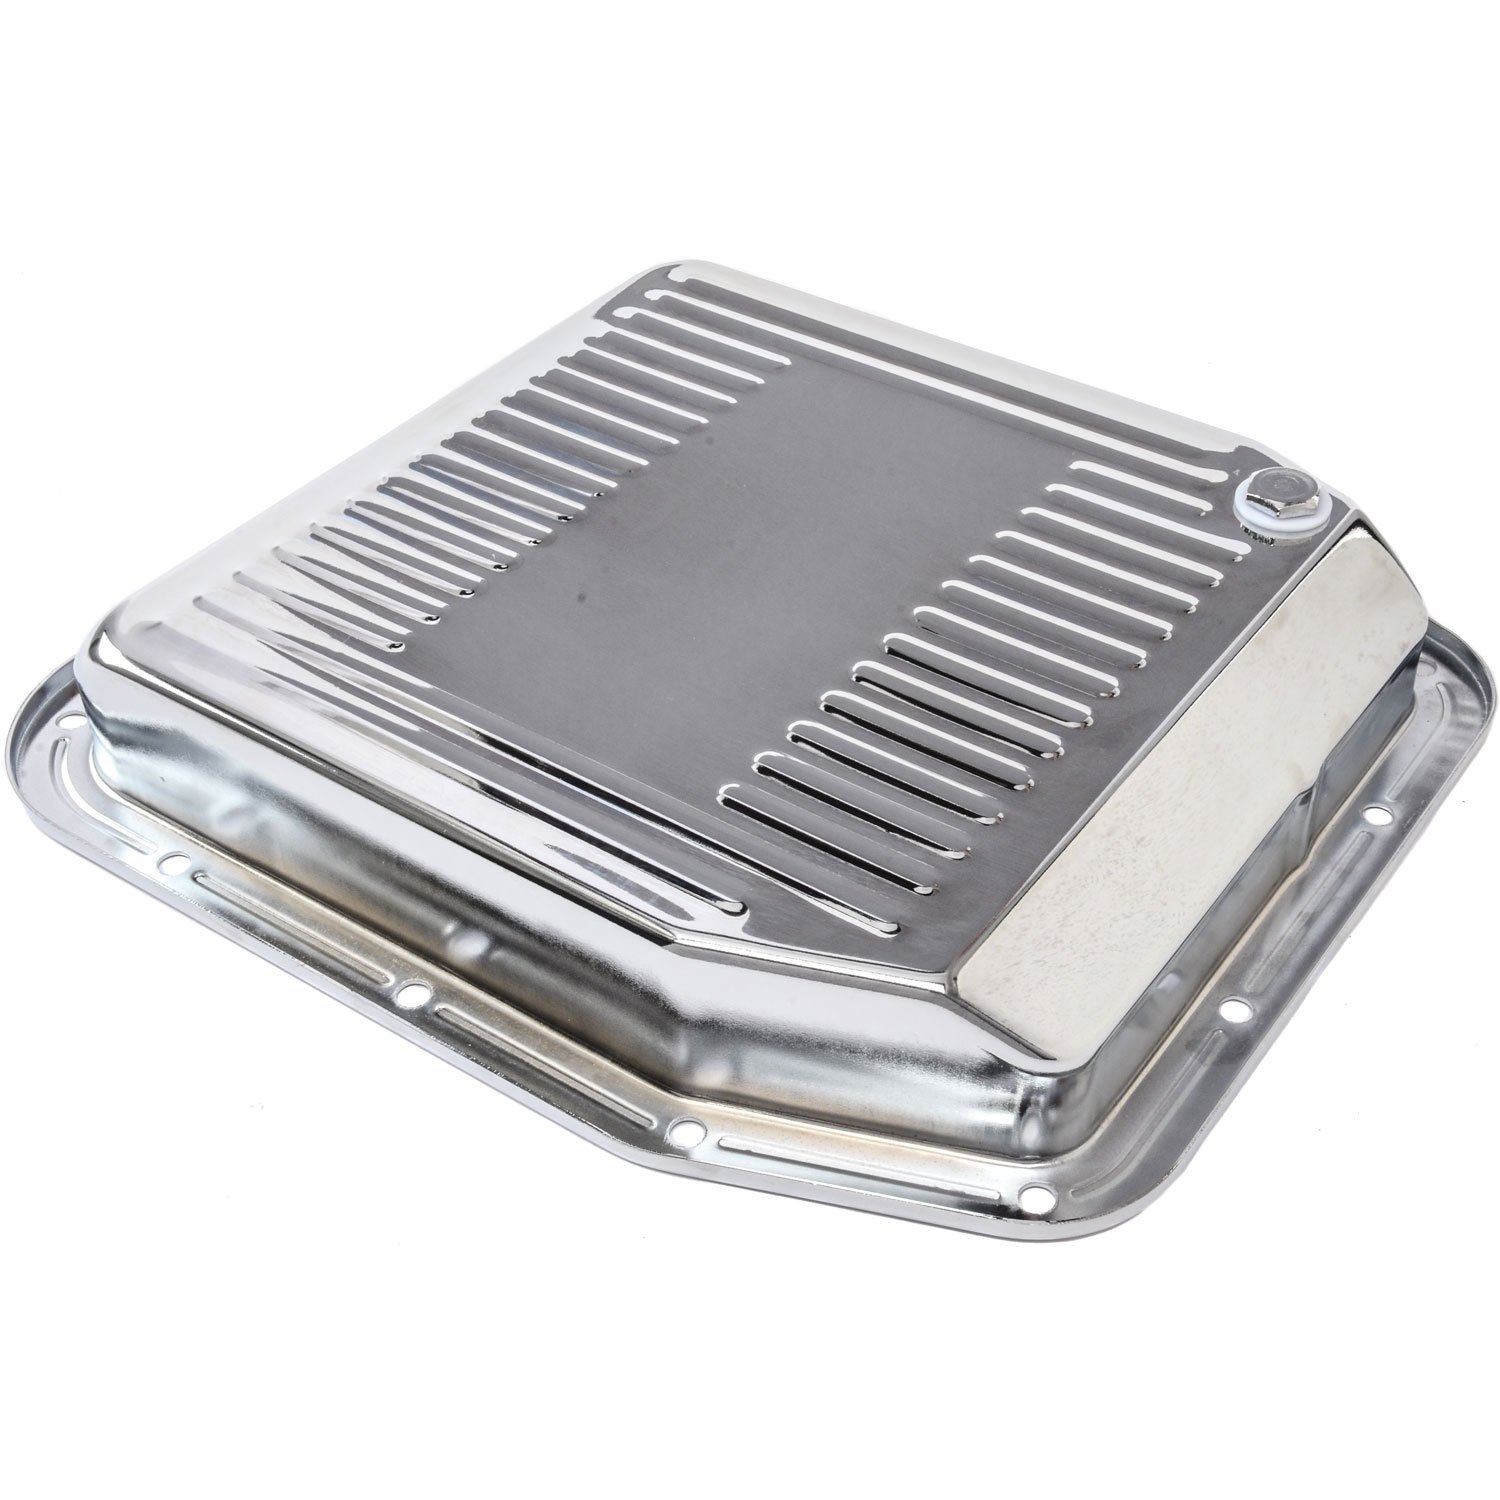 Automatic Transmission Pan for Ford AOD Transmission [Chrome Plated Steel]